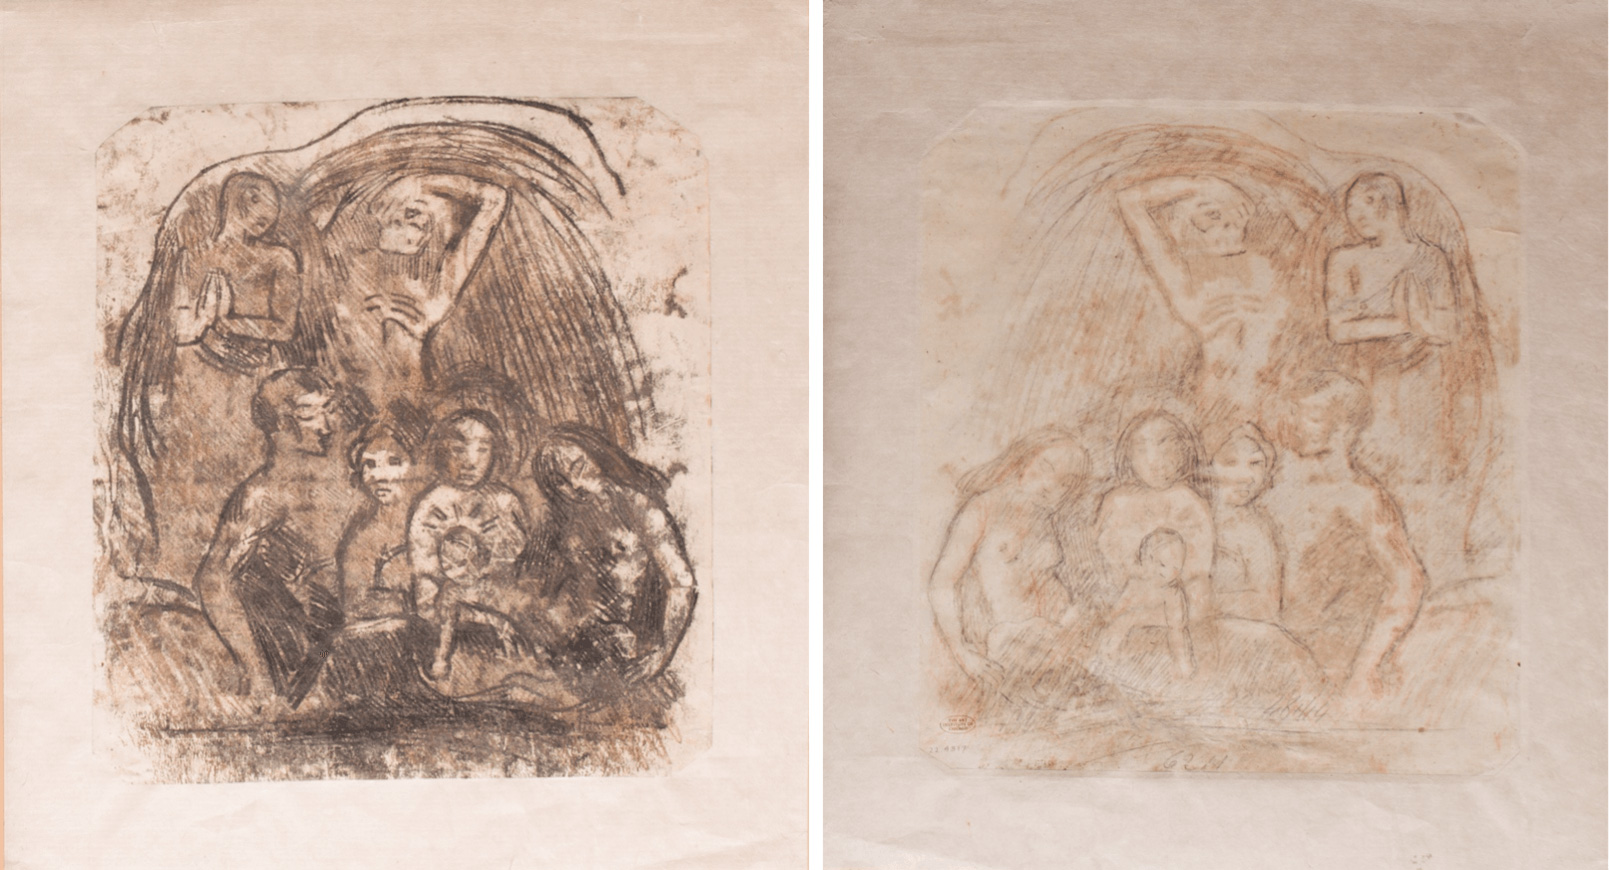 The left and right images depict the front and back, respectively, of Gauguin's Nativity (1902). The Art Institute of Chicago